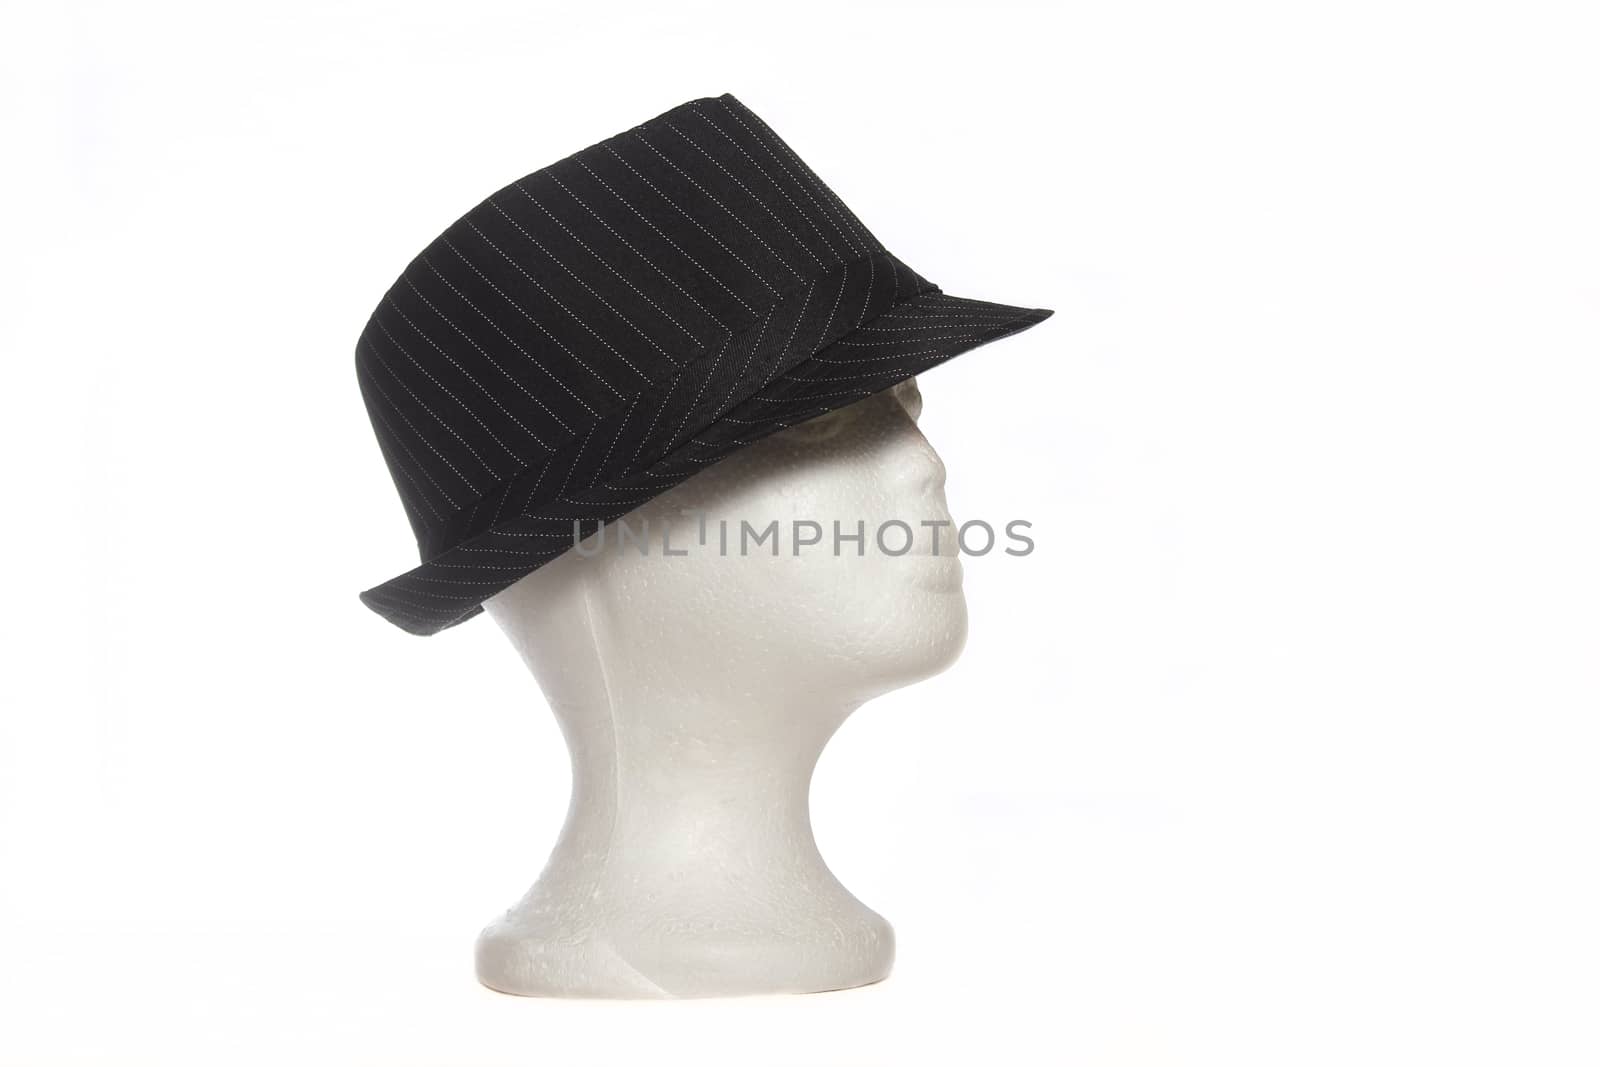 Classic Fedora Hat on Mannequin Head Isolated on White